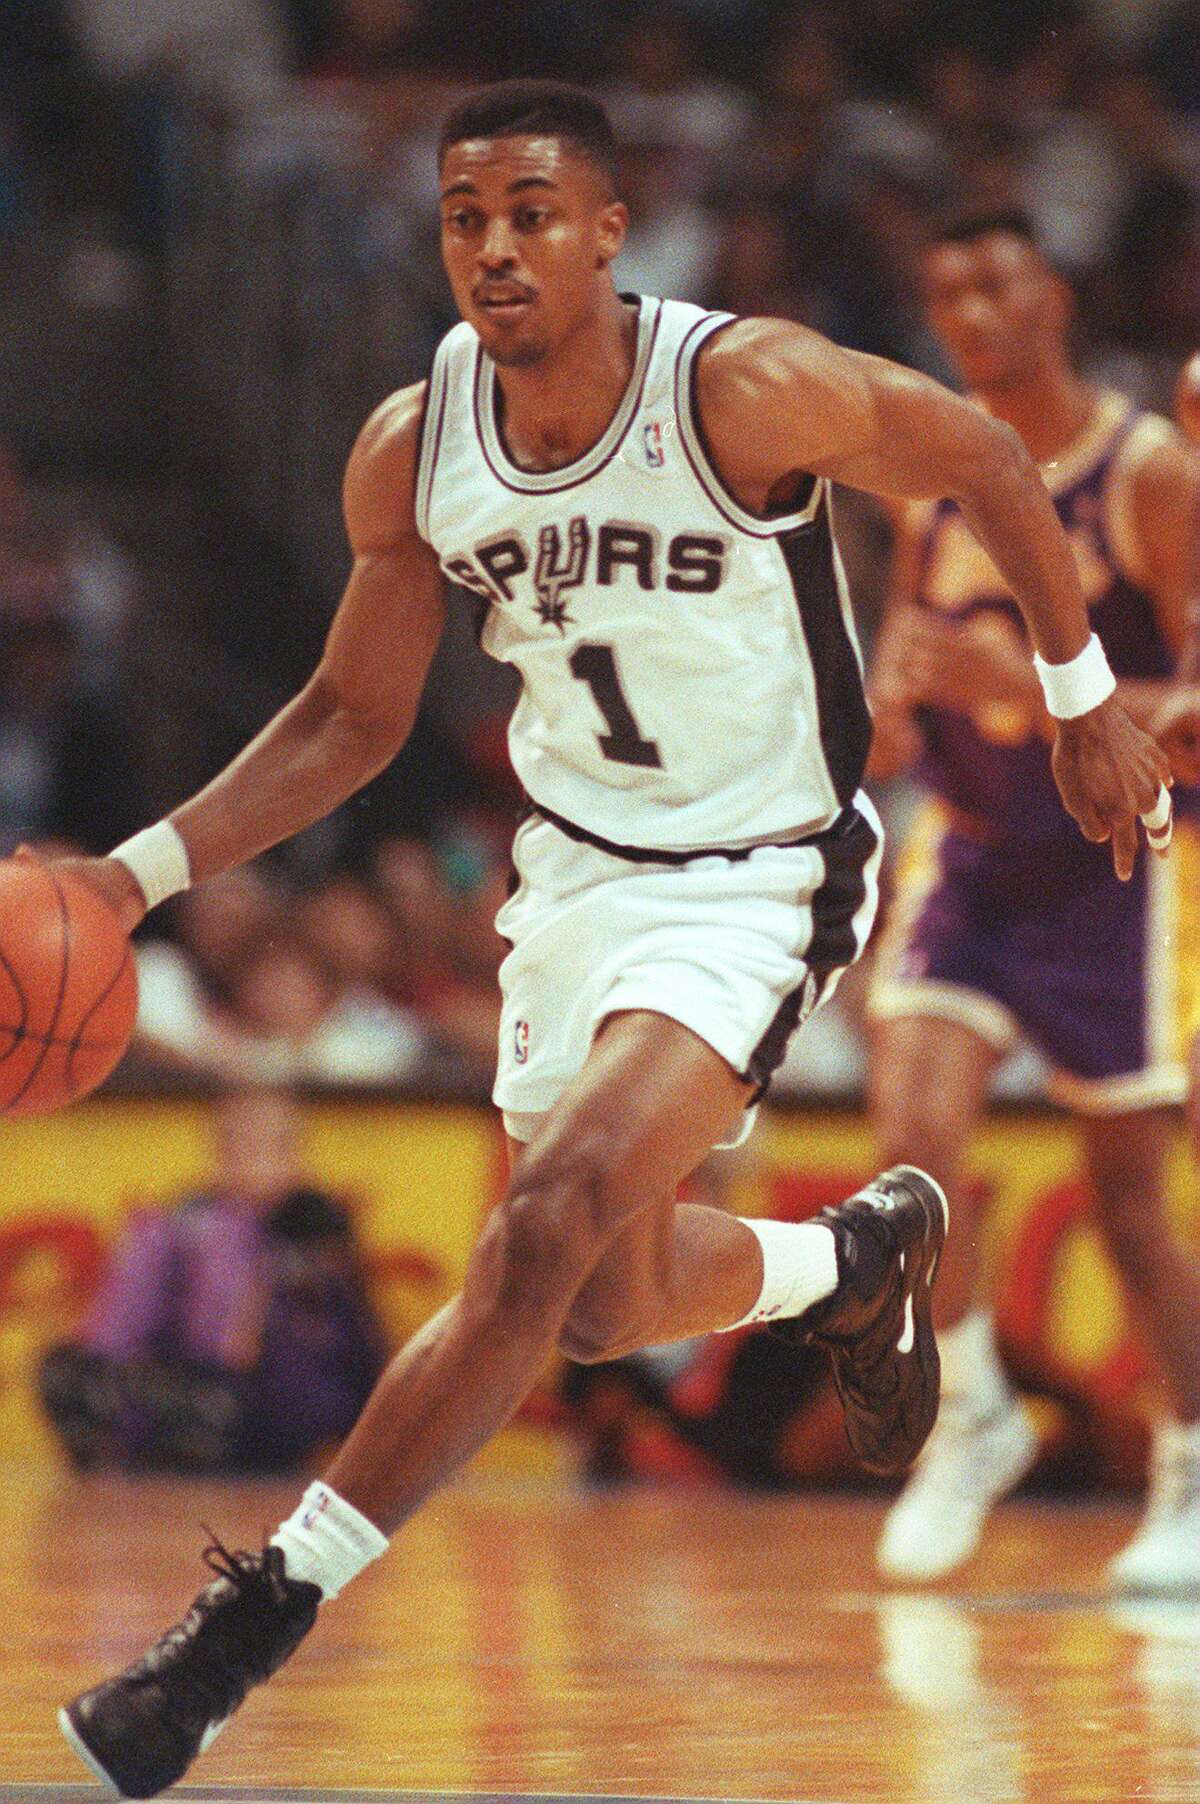 Former Spurs guard Rod Strickland, he of the errant playoff pass, was a frequent vision when the writer was battling what turned out to be mono.